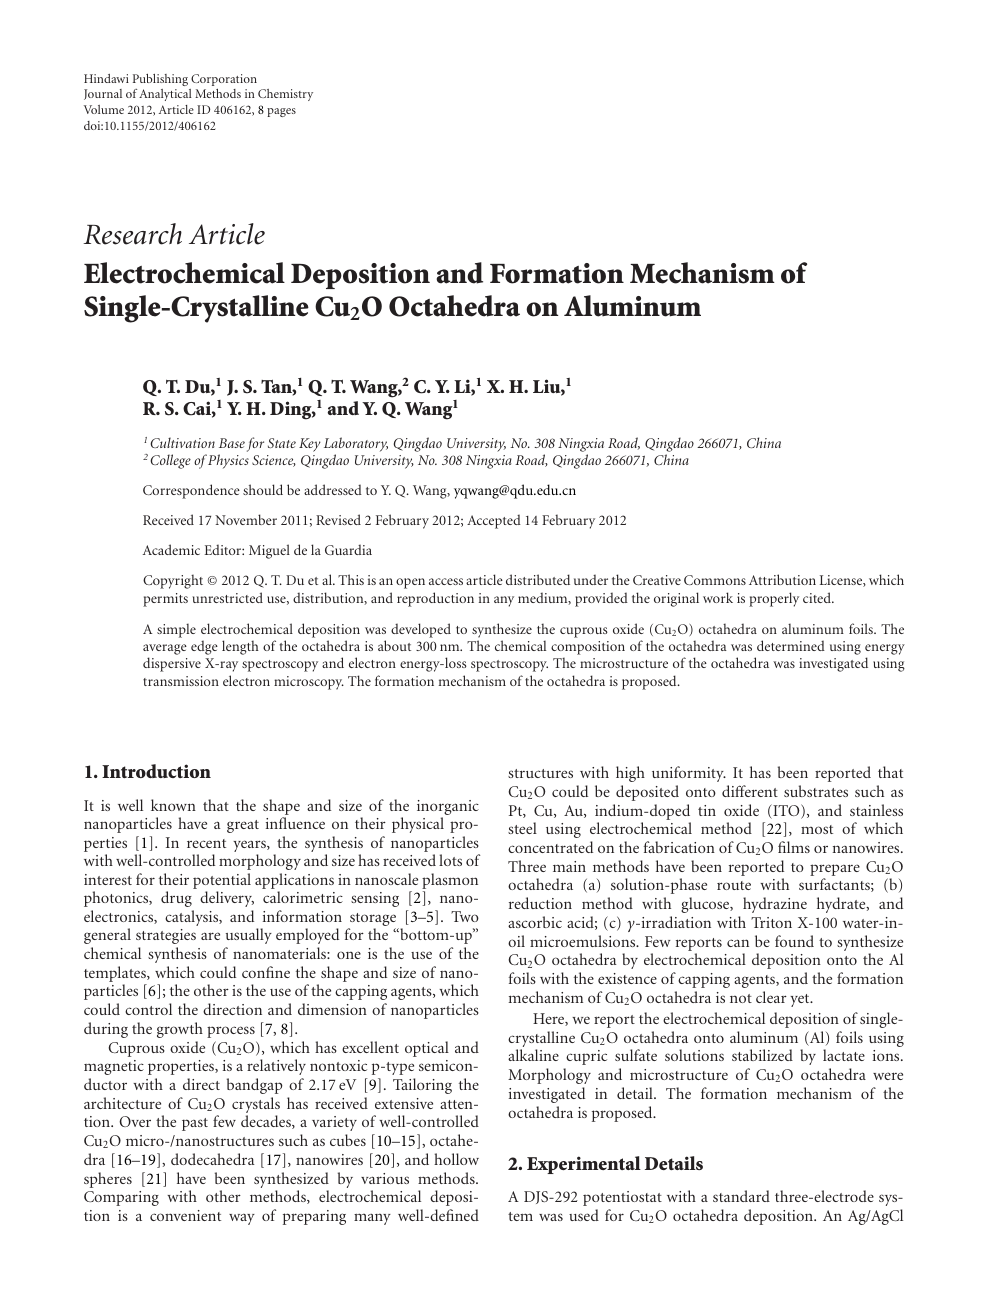 Electrochemical Deposition And Formation Mechanism Of Single Crystalline Cu 2 O Octahedra On Aluminum Topic Of Research Paper In Nano Technology Download Scholarly Article Pdf And Read For Free On Cyberleninka Open Science